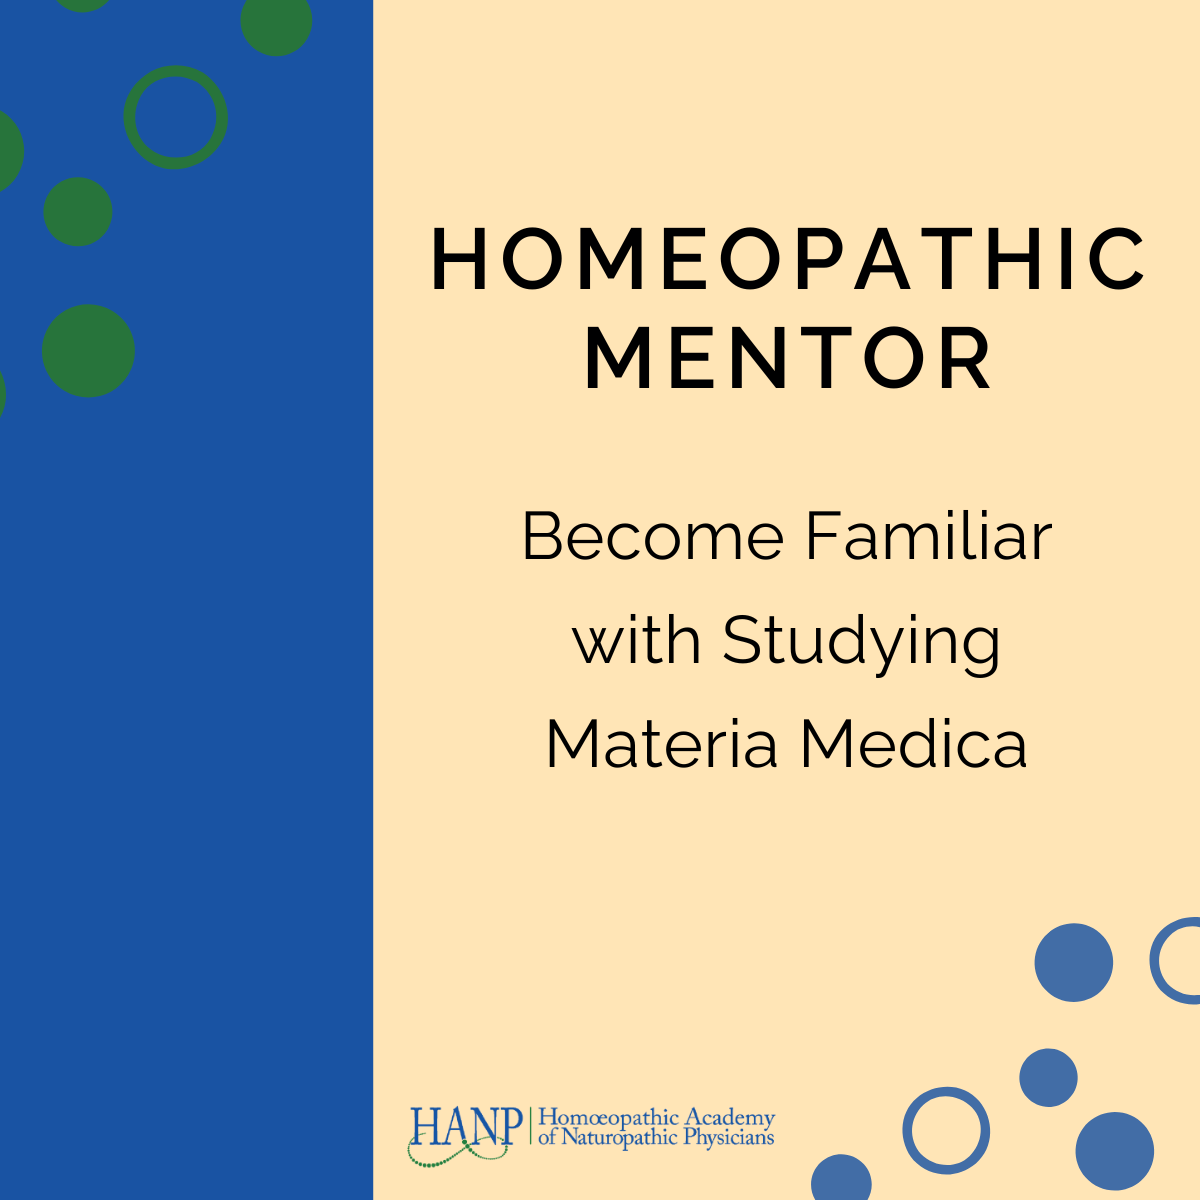 Homeopathic Mentor – Becoming Familiar with Studying Materia Medica